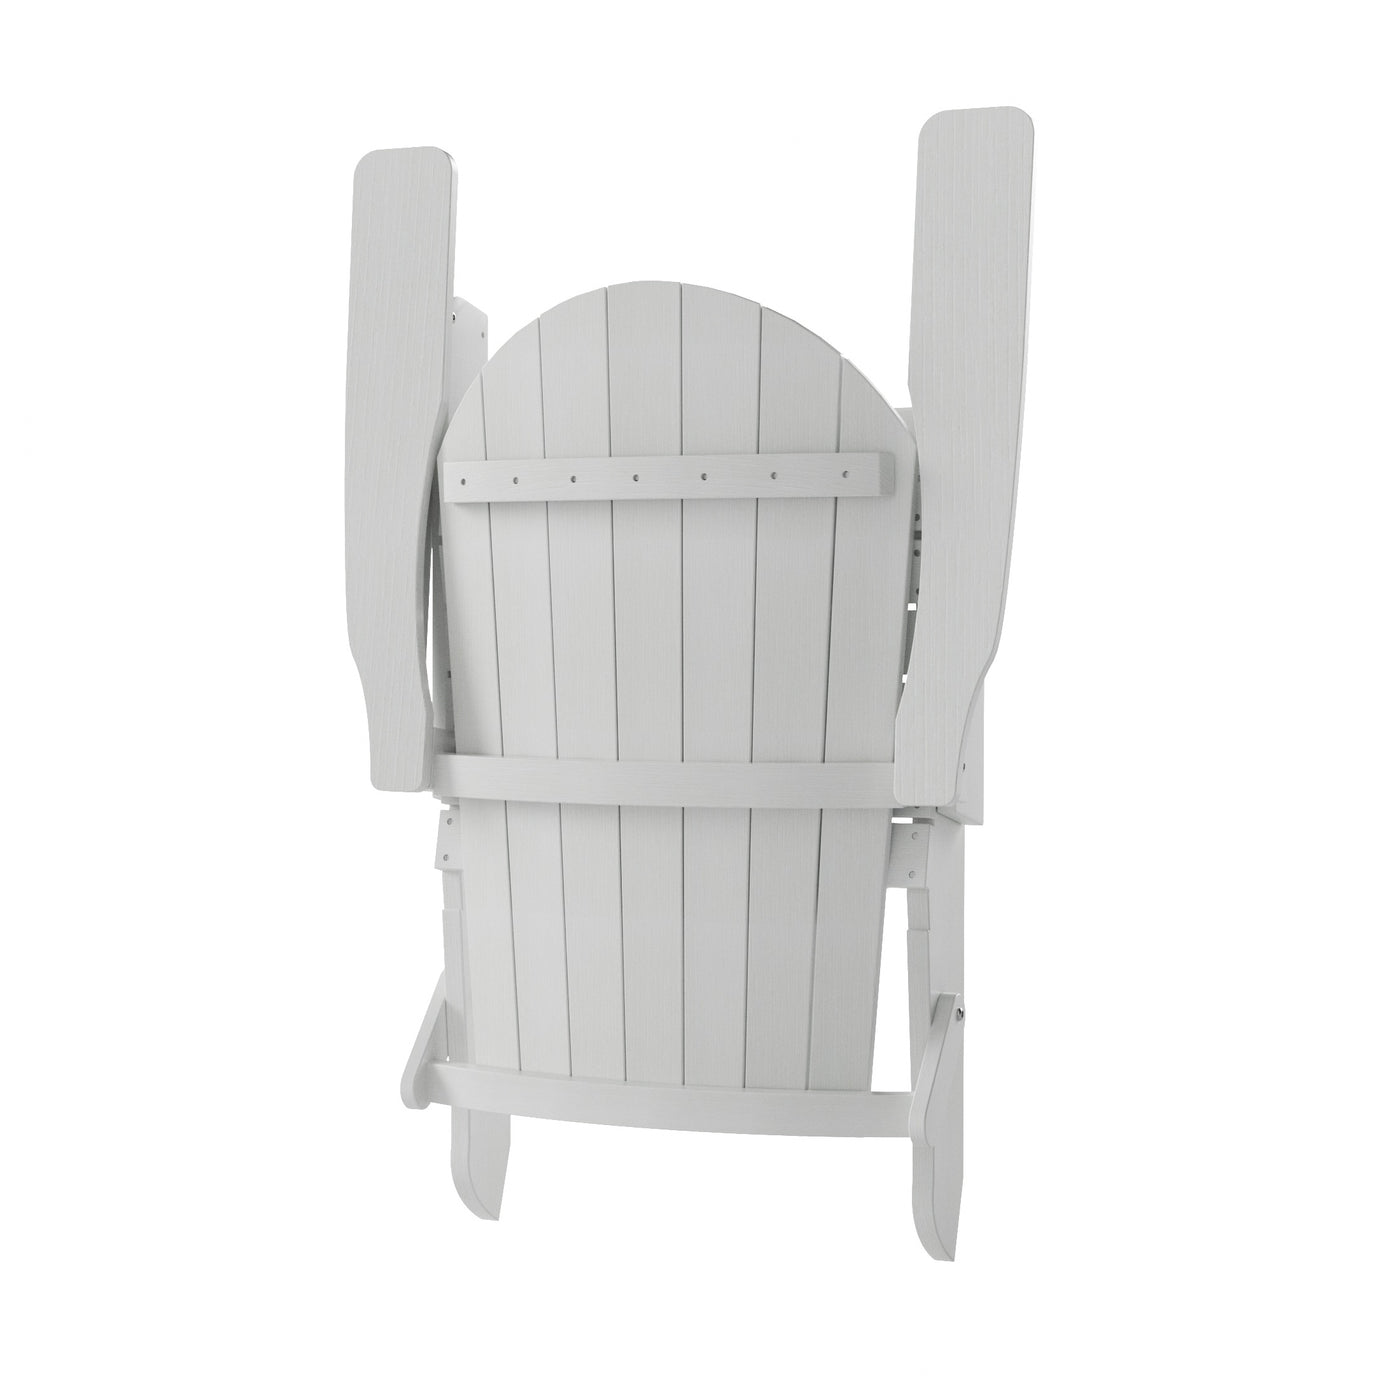 Tuscany HIPS 7-Piece Outdoor Folding Adirondack Chair With Coffee Table and Side Table Set